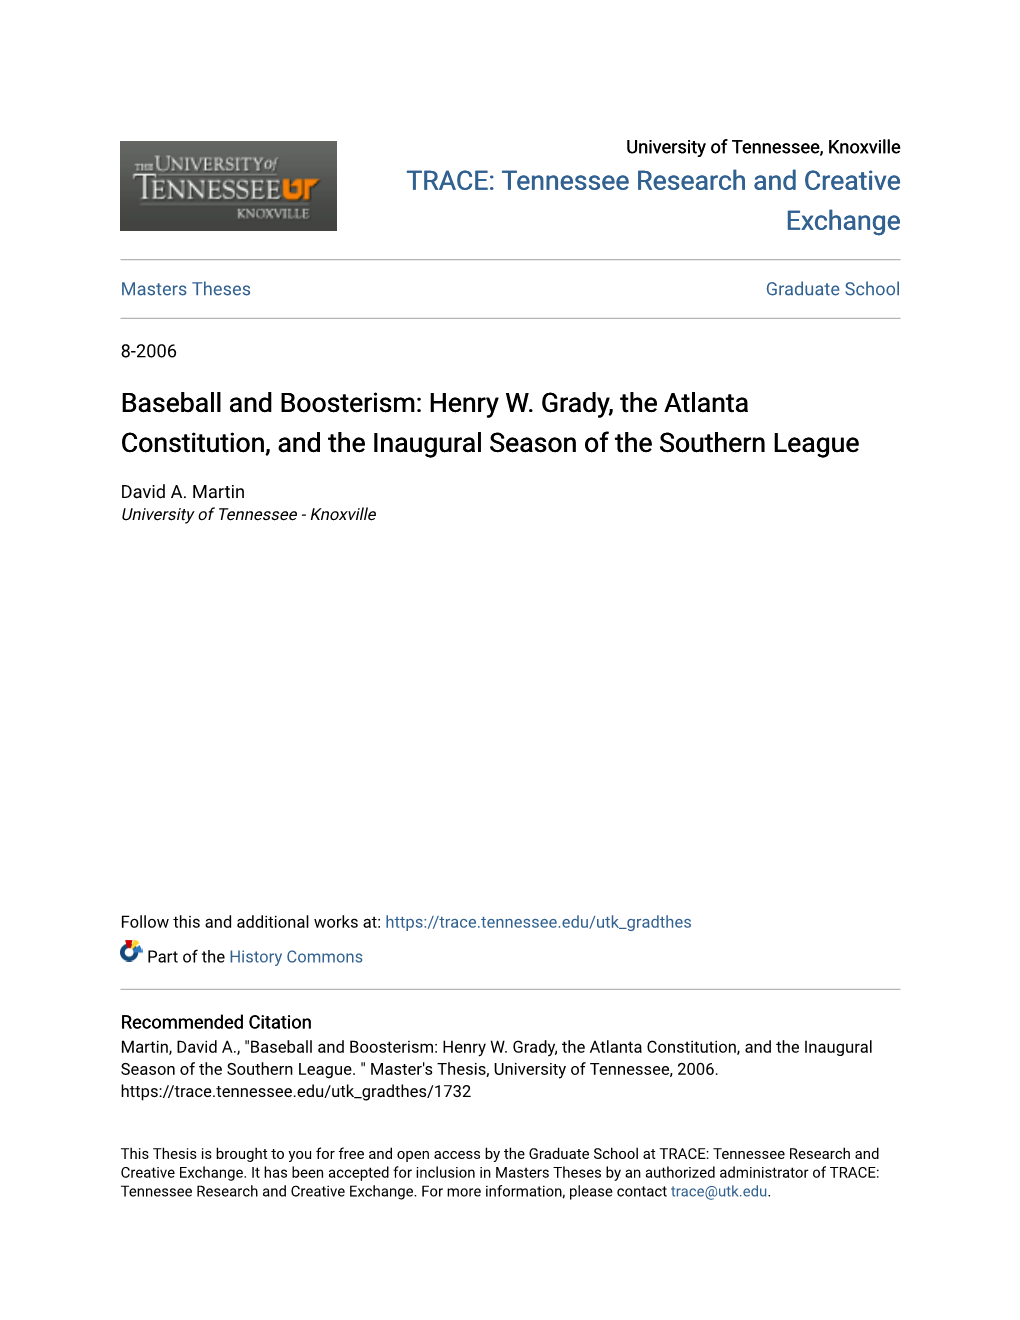 Baseball and Boosterism: Henry W. Grady, the Atlanta Constitution, and the Inaugural Season of the Southern League